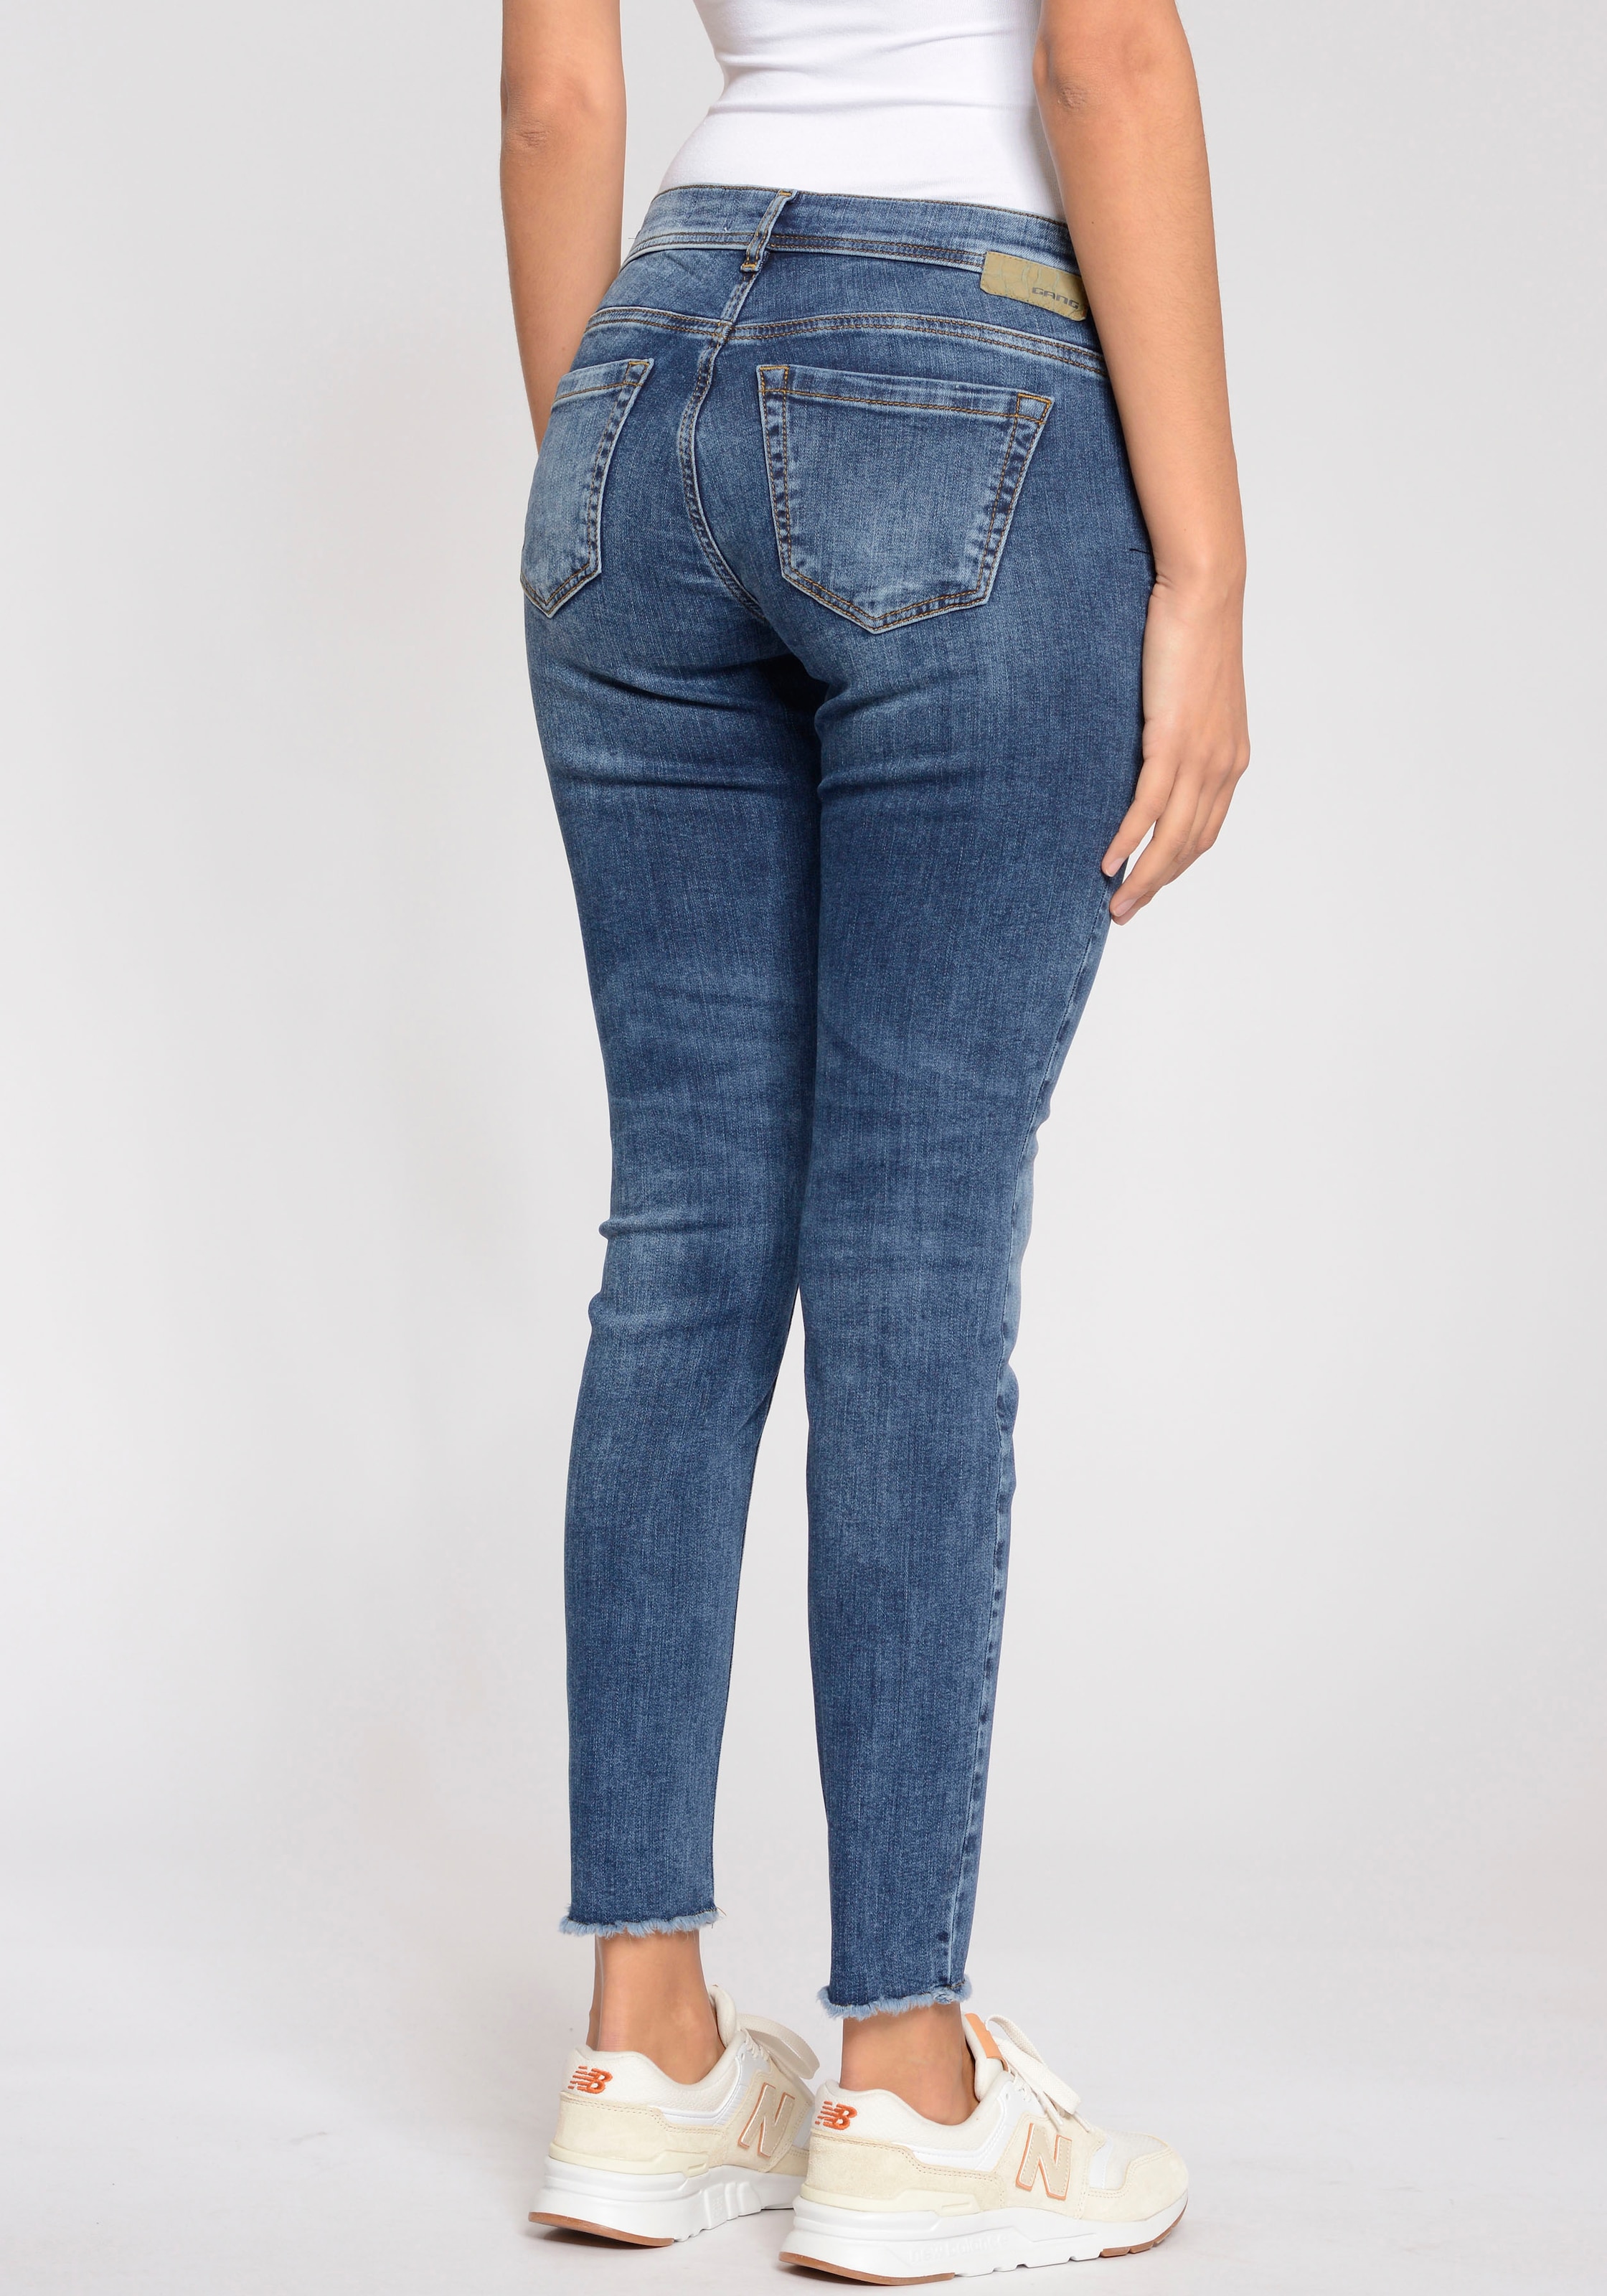 GANG bei Skinny-fit-Jeans ♕ »94 Faye Cropped«